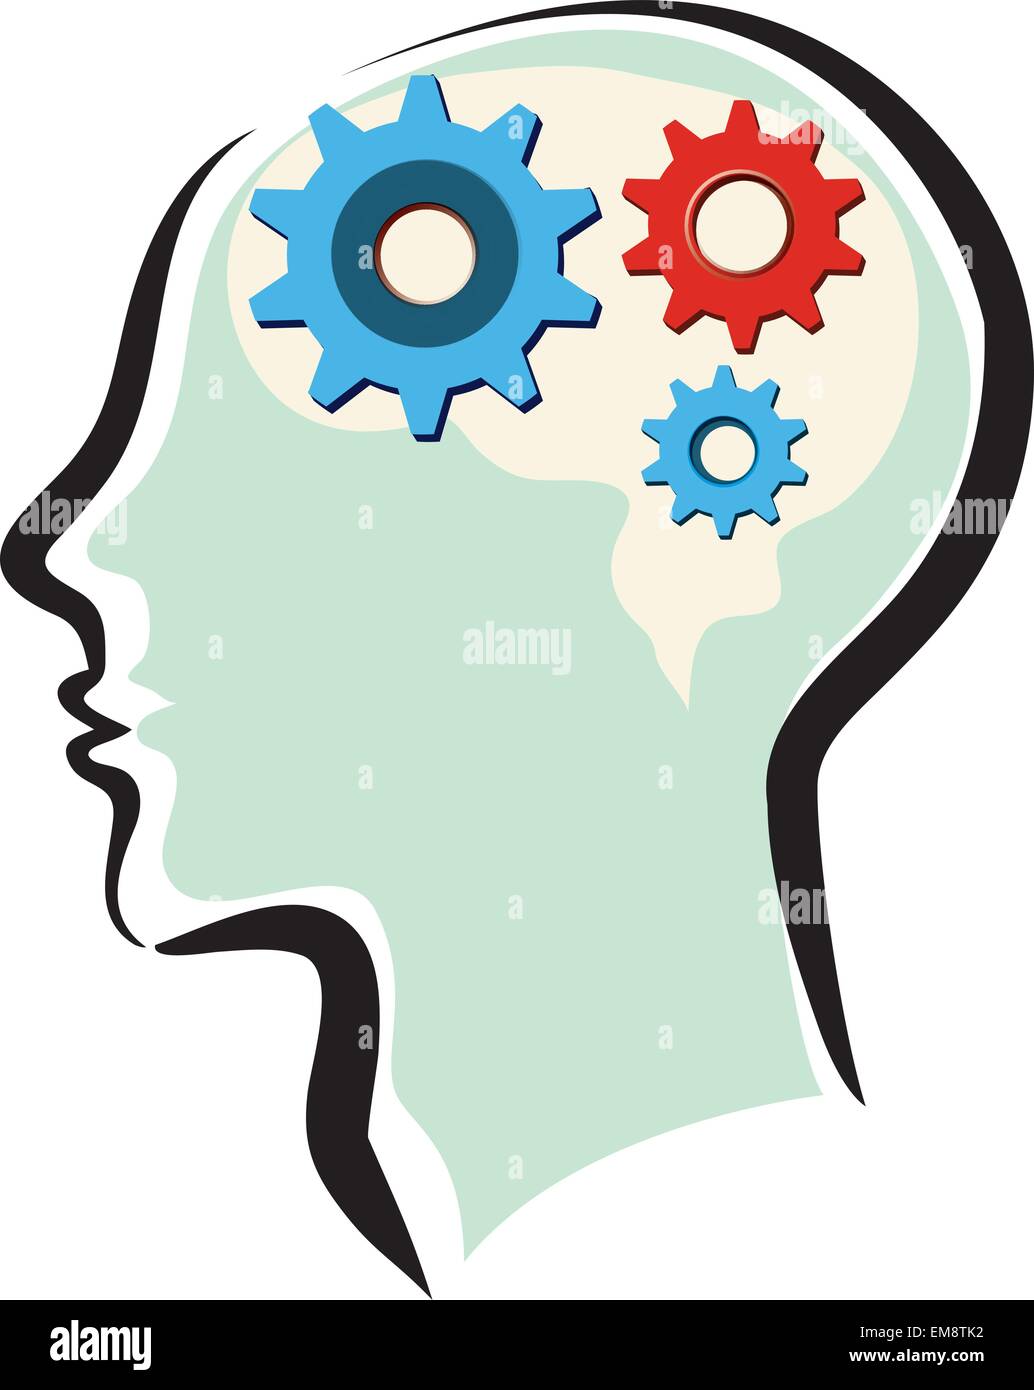 mans head with brain and thinking process Stock Vector